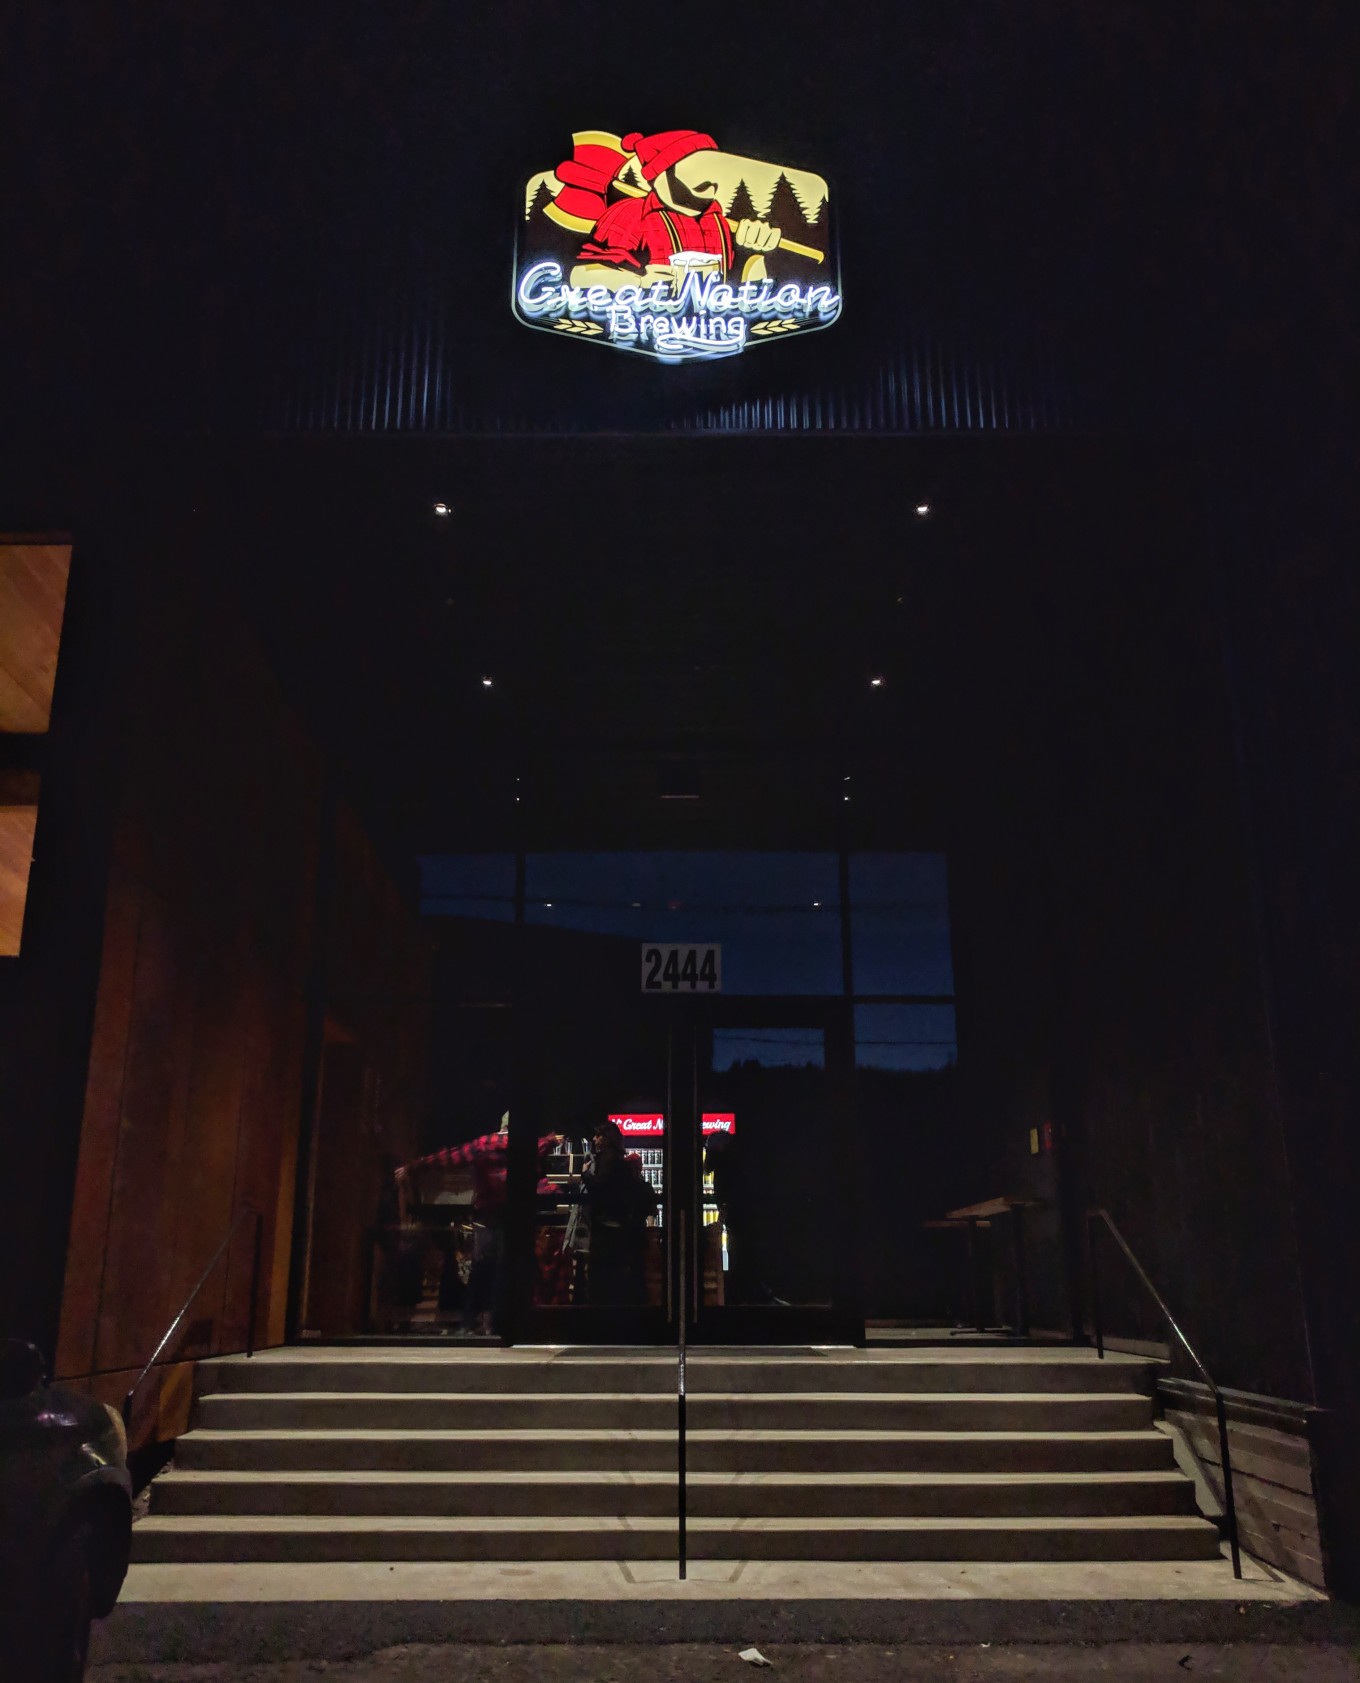 Great Notion Brewing NW Front Entrance Night Neon Sign Portland Oregon